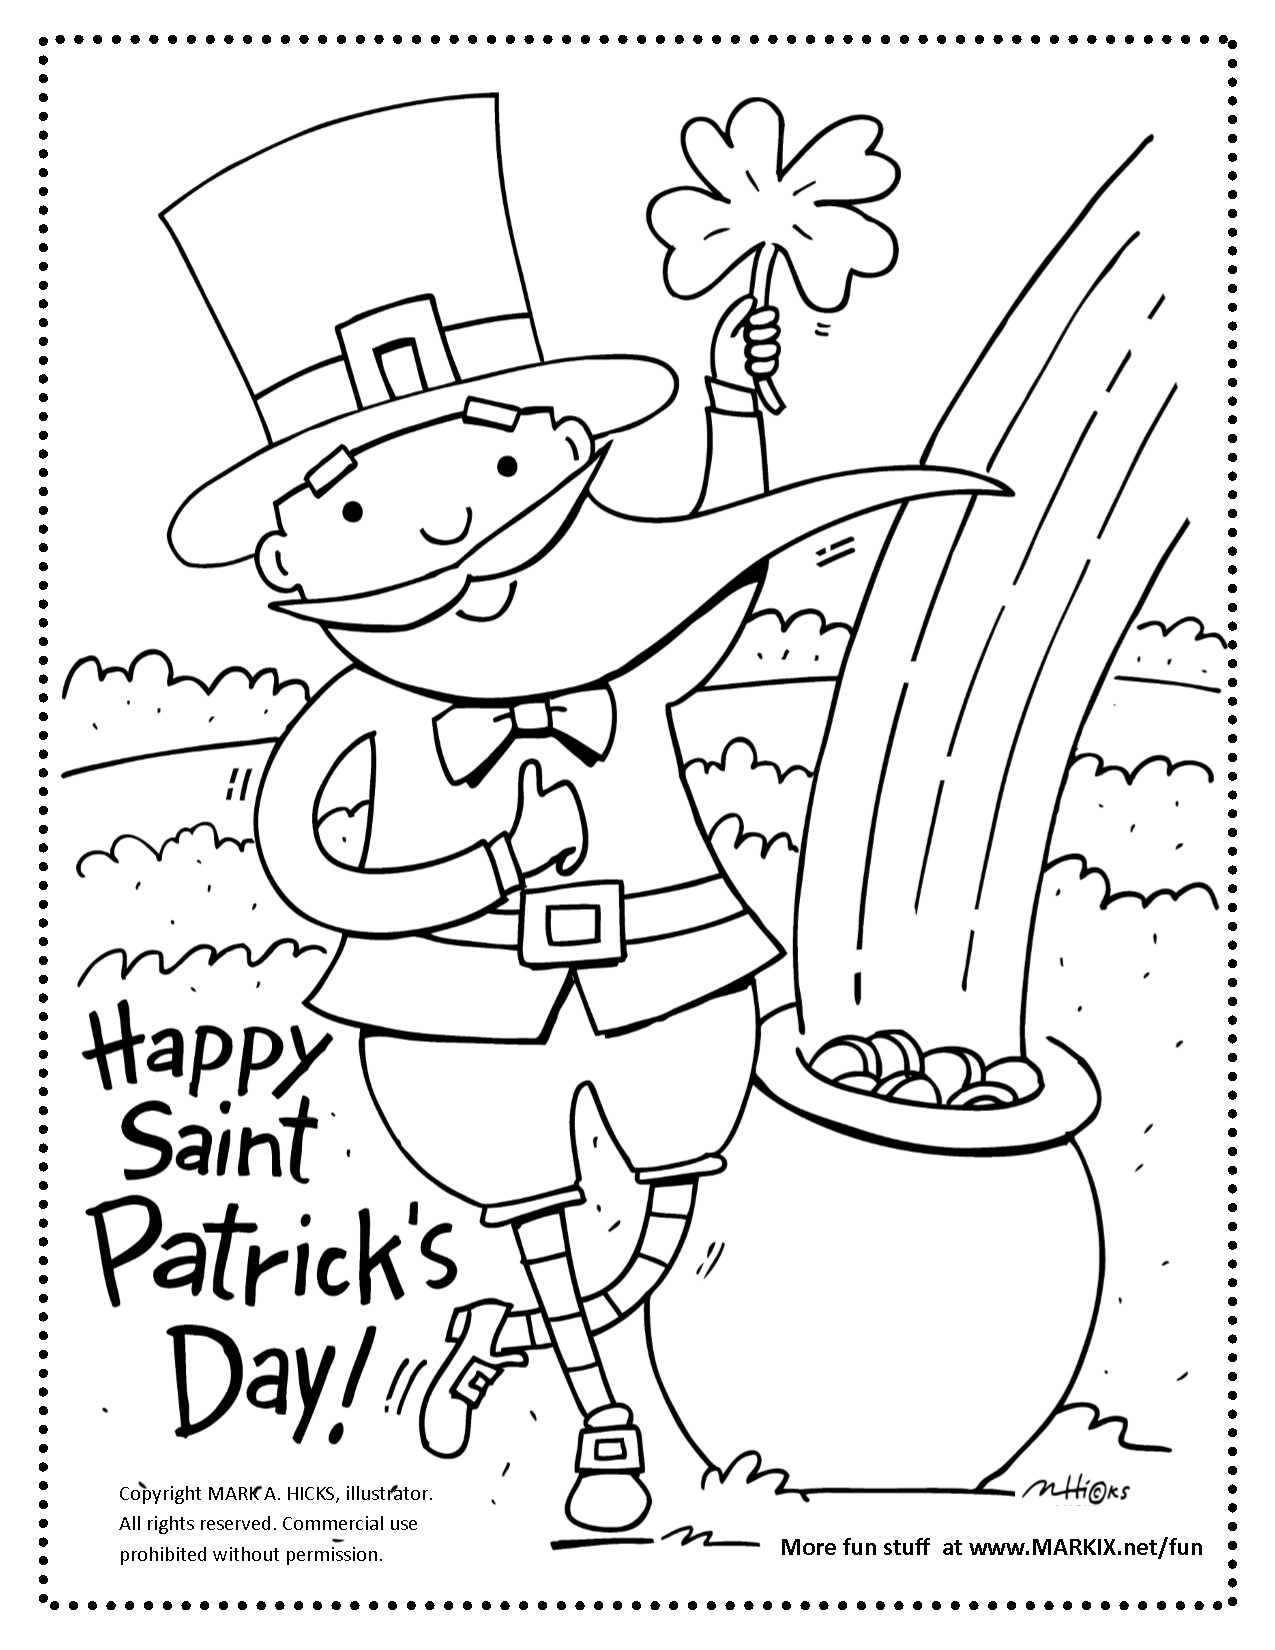 Happy Saint Patrick's Day Coloring Page. Make your friends green with envy and have the luck of the Irish on Saint Paddy's Day by coloring this O'coloring page.